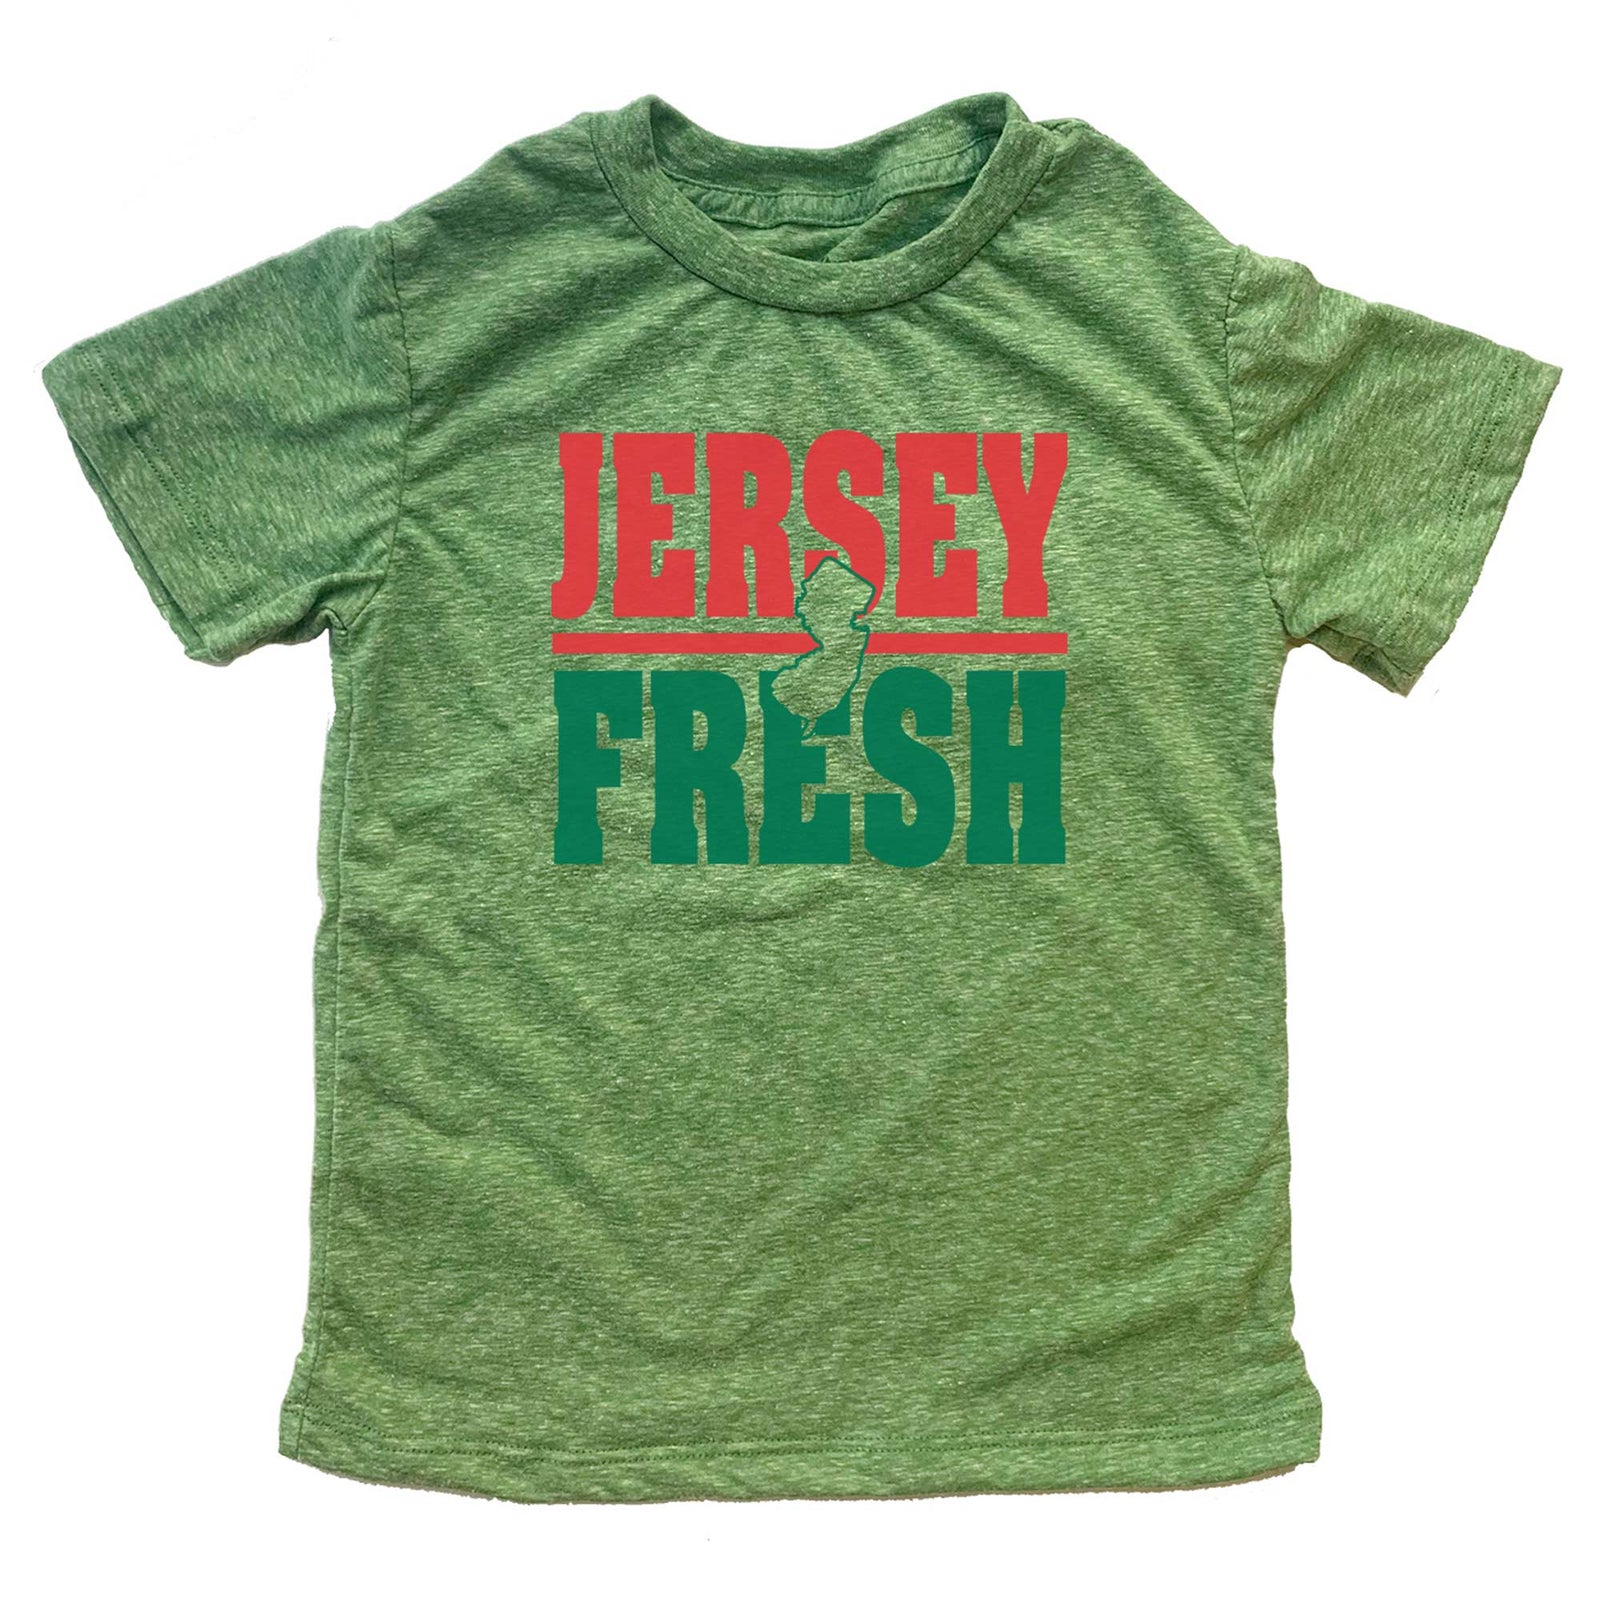 Kids New Jersey Fresh Vintage Graphic T-Shirt | Cute Funny Garden State Kelly Tee | Solid Threads